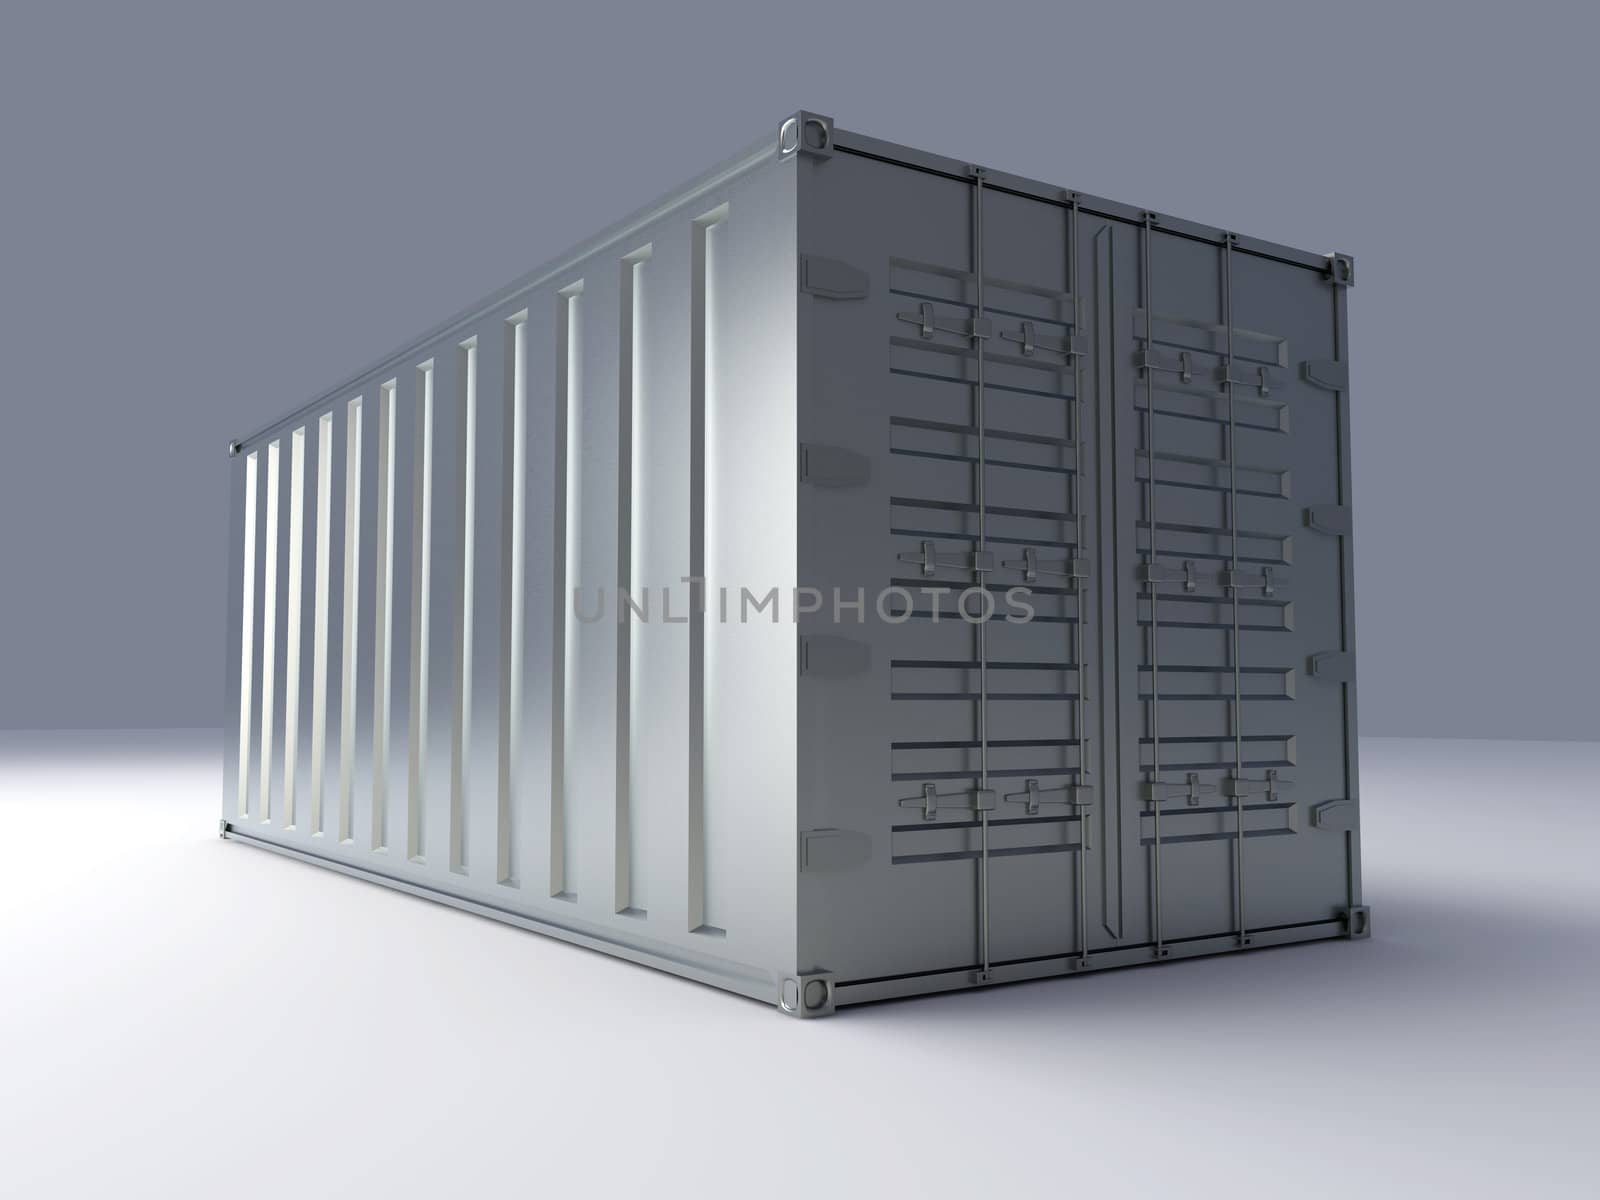 Container by Spectral